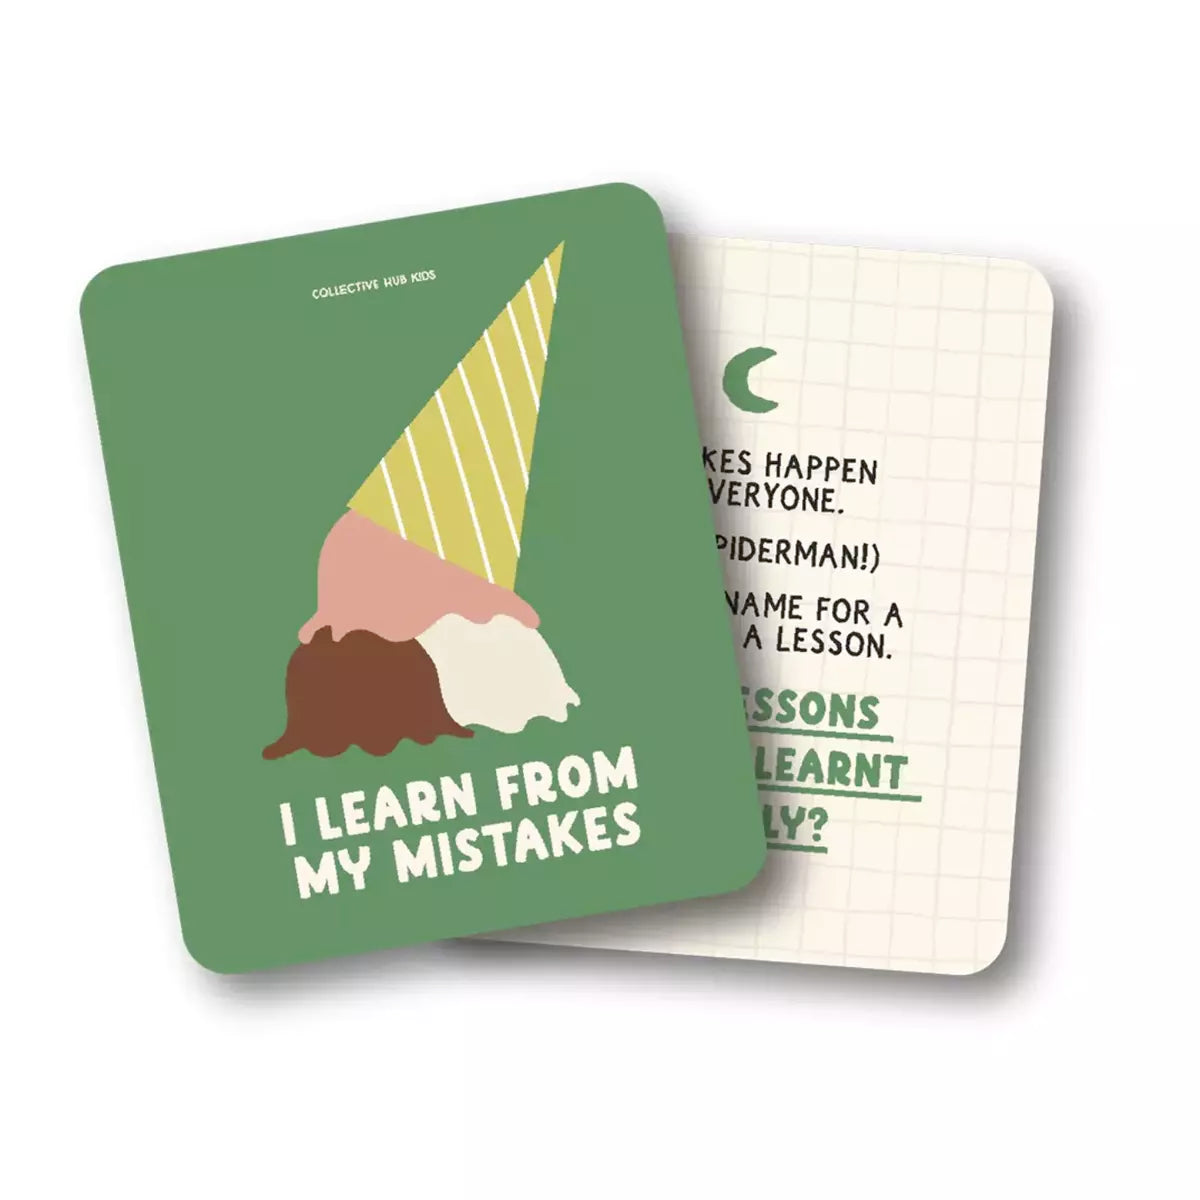 I learn from my mistakes with Learning About Me kids coasters by Collective Hub.